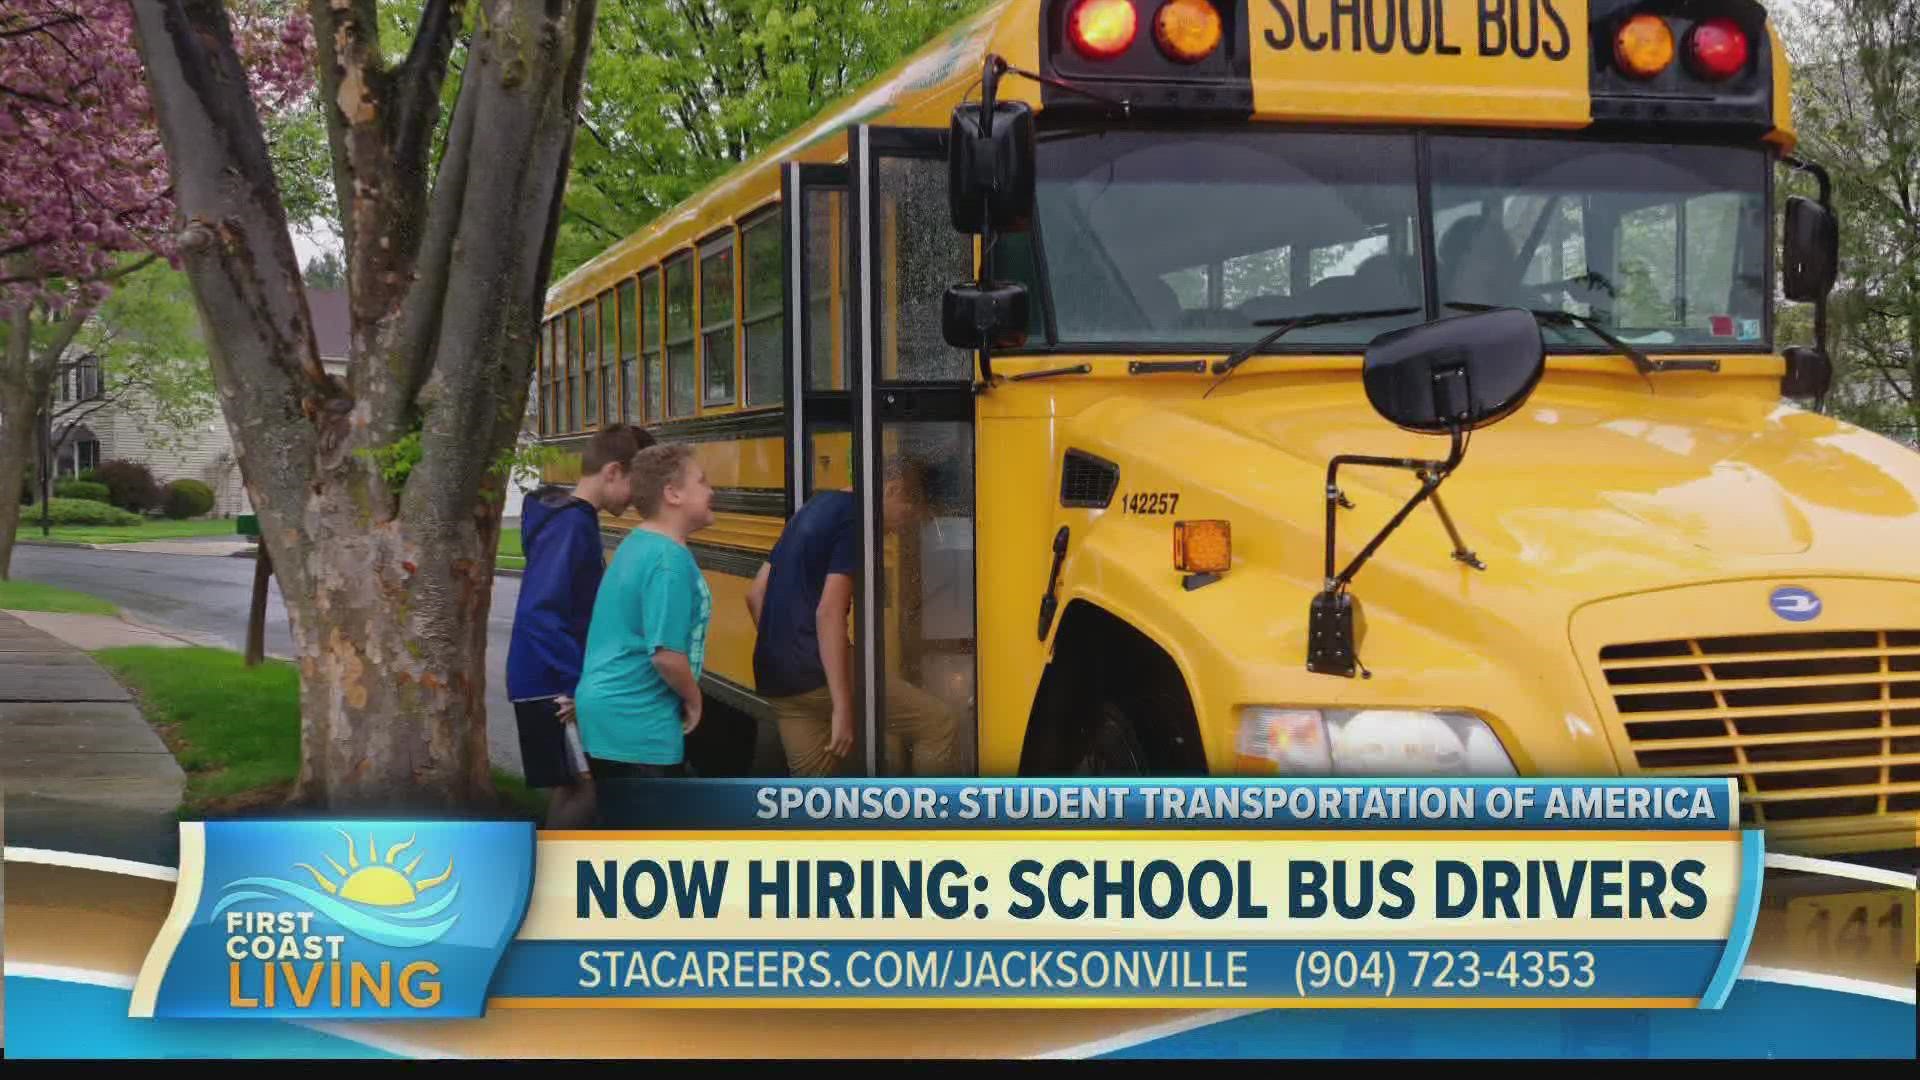 School bus drivers are needed in our area. Hear from the southeast region vice-president of operations to see if this is a good fit for you.